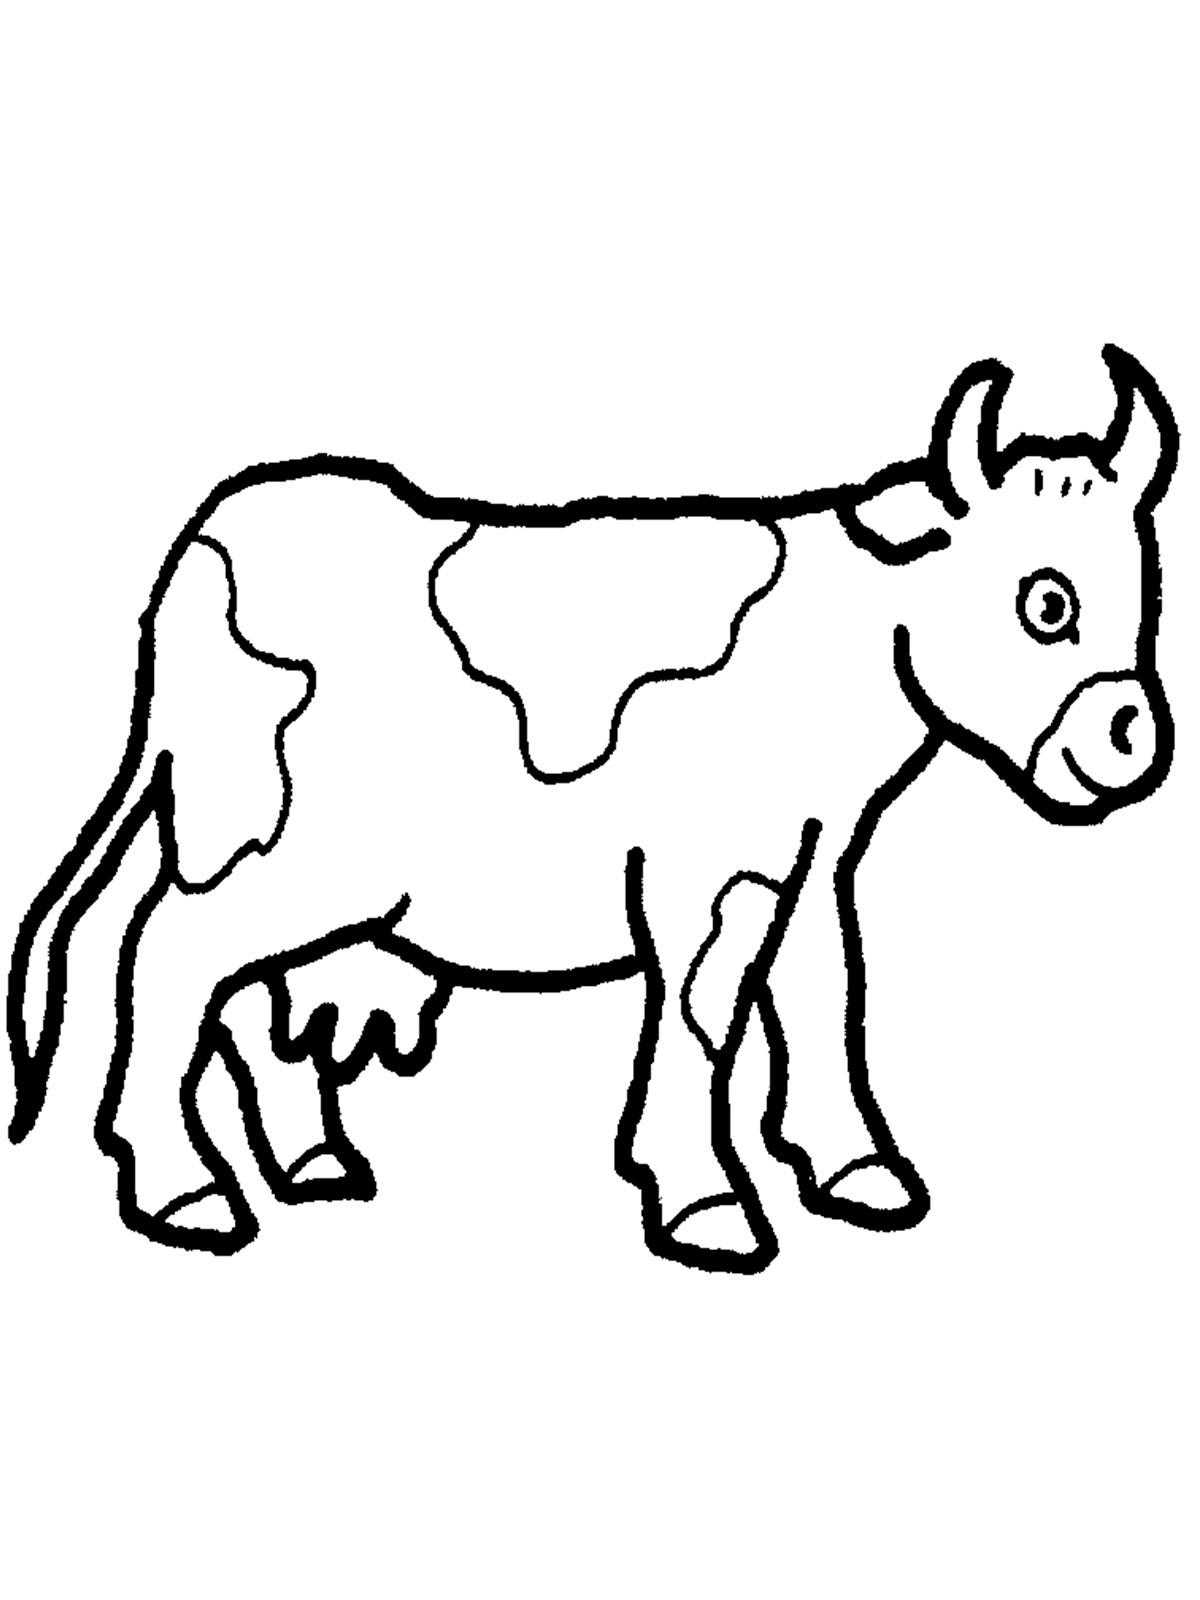 Coloring Cow. Category Pets allowed. Tags:  cow.